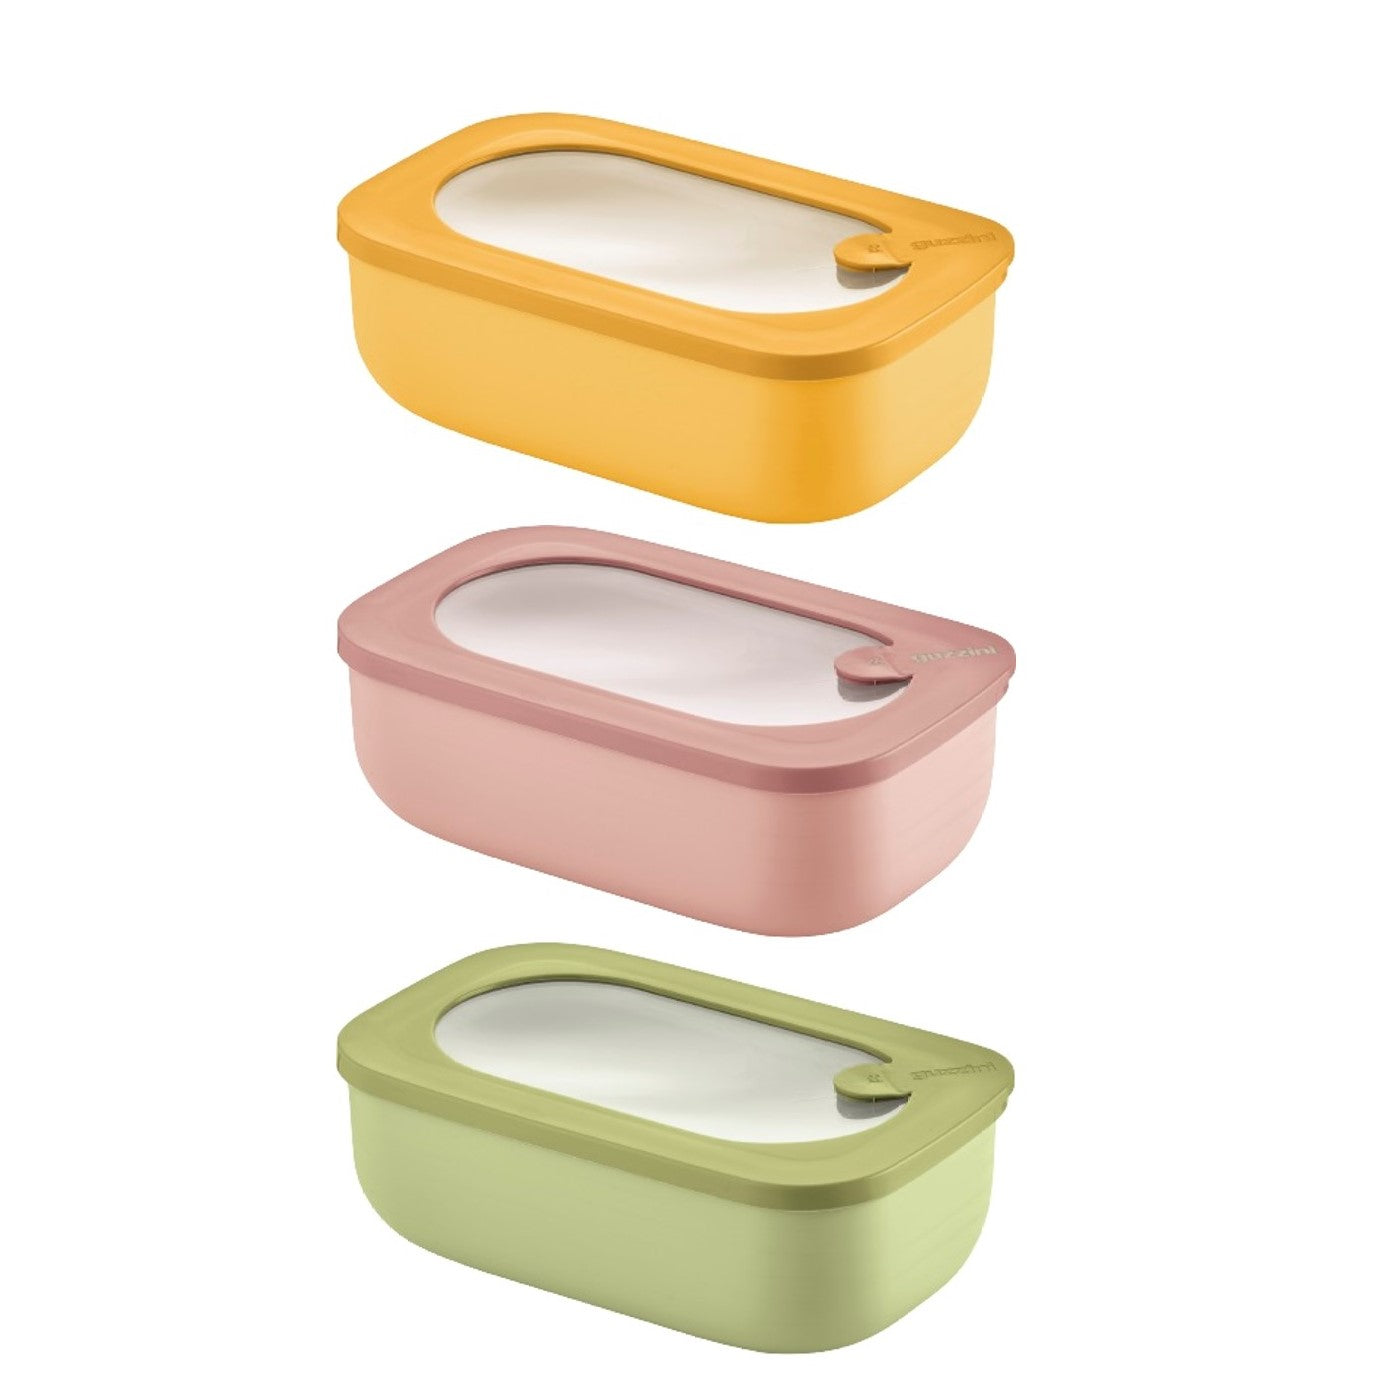 guzzini Eco Store & More Storage Containers, Set of 3 - Interismo Online  Shop Global